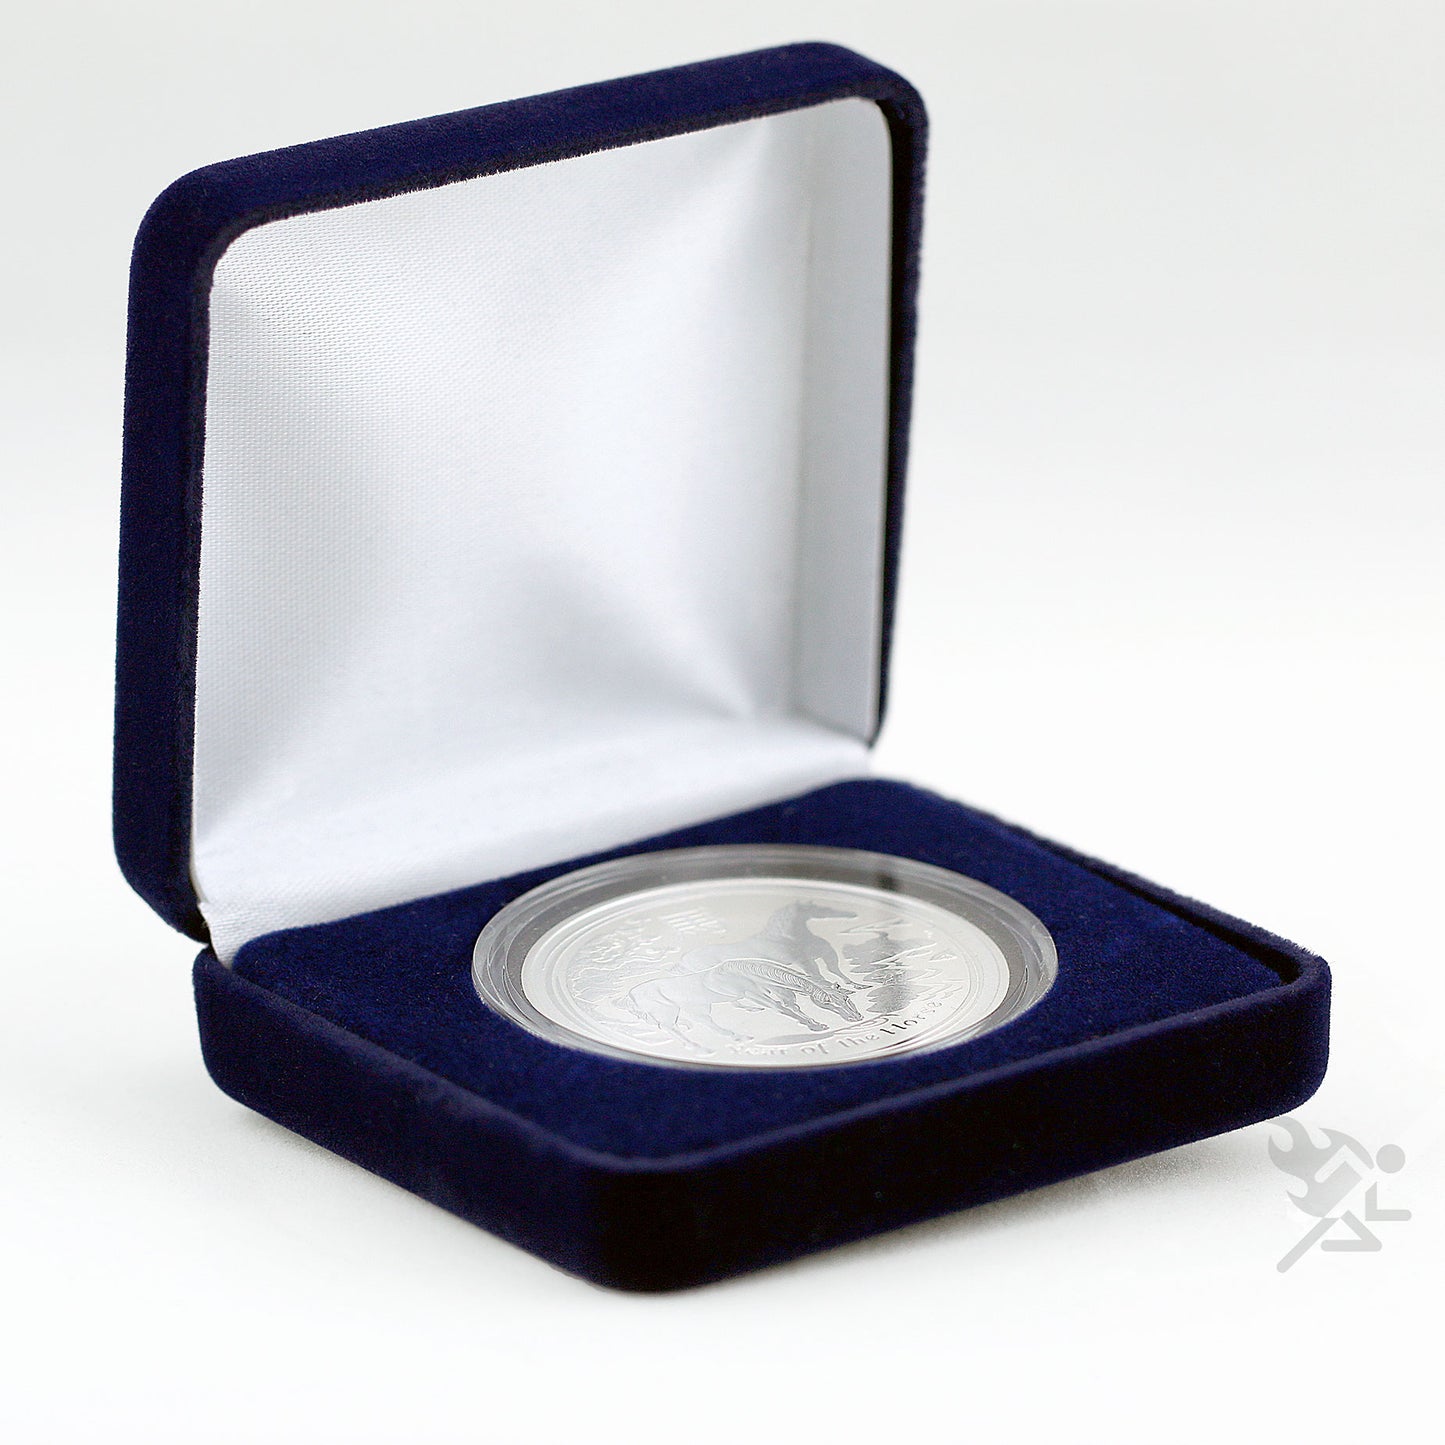 Coin Display Box for AirTite XXL - Model "X" Coin Holders